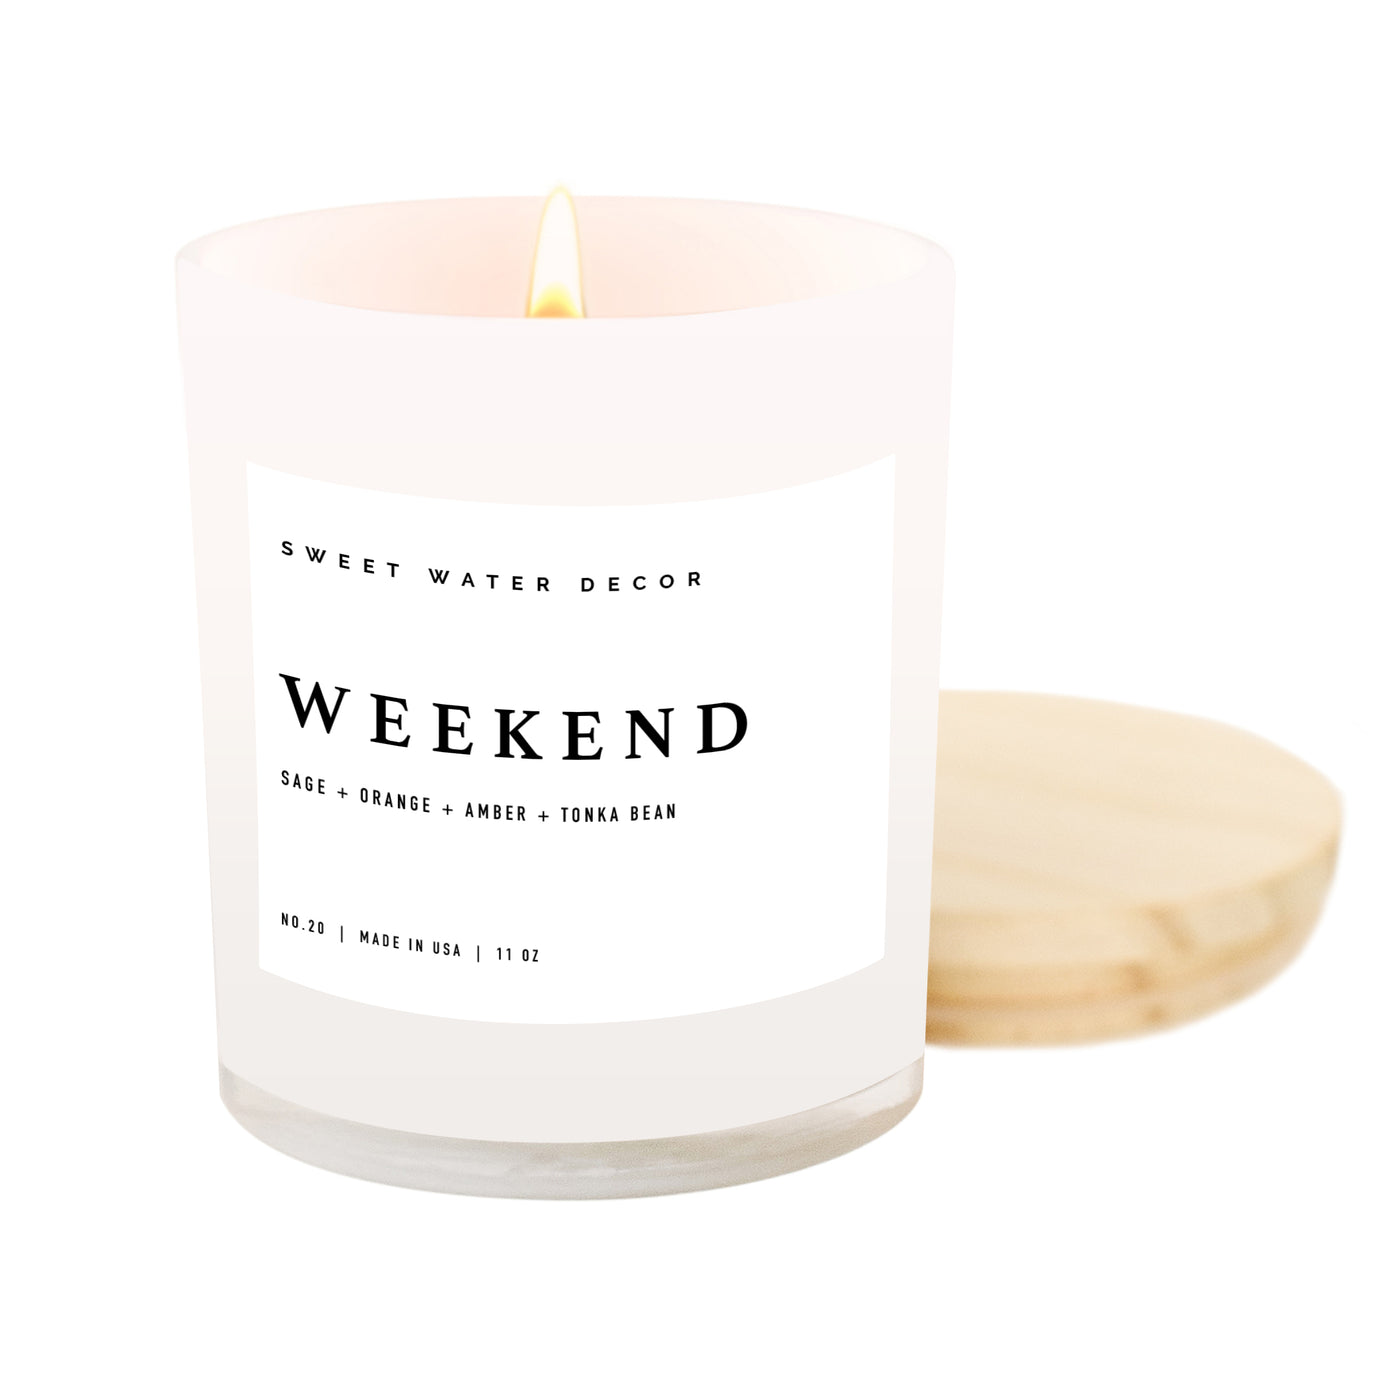 Weekend Soy Candle - White Jar - 11 oz - Sweet Water Decor - Candles